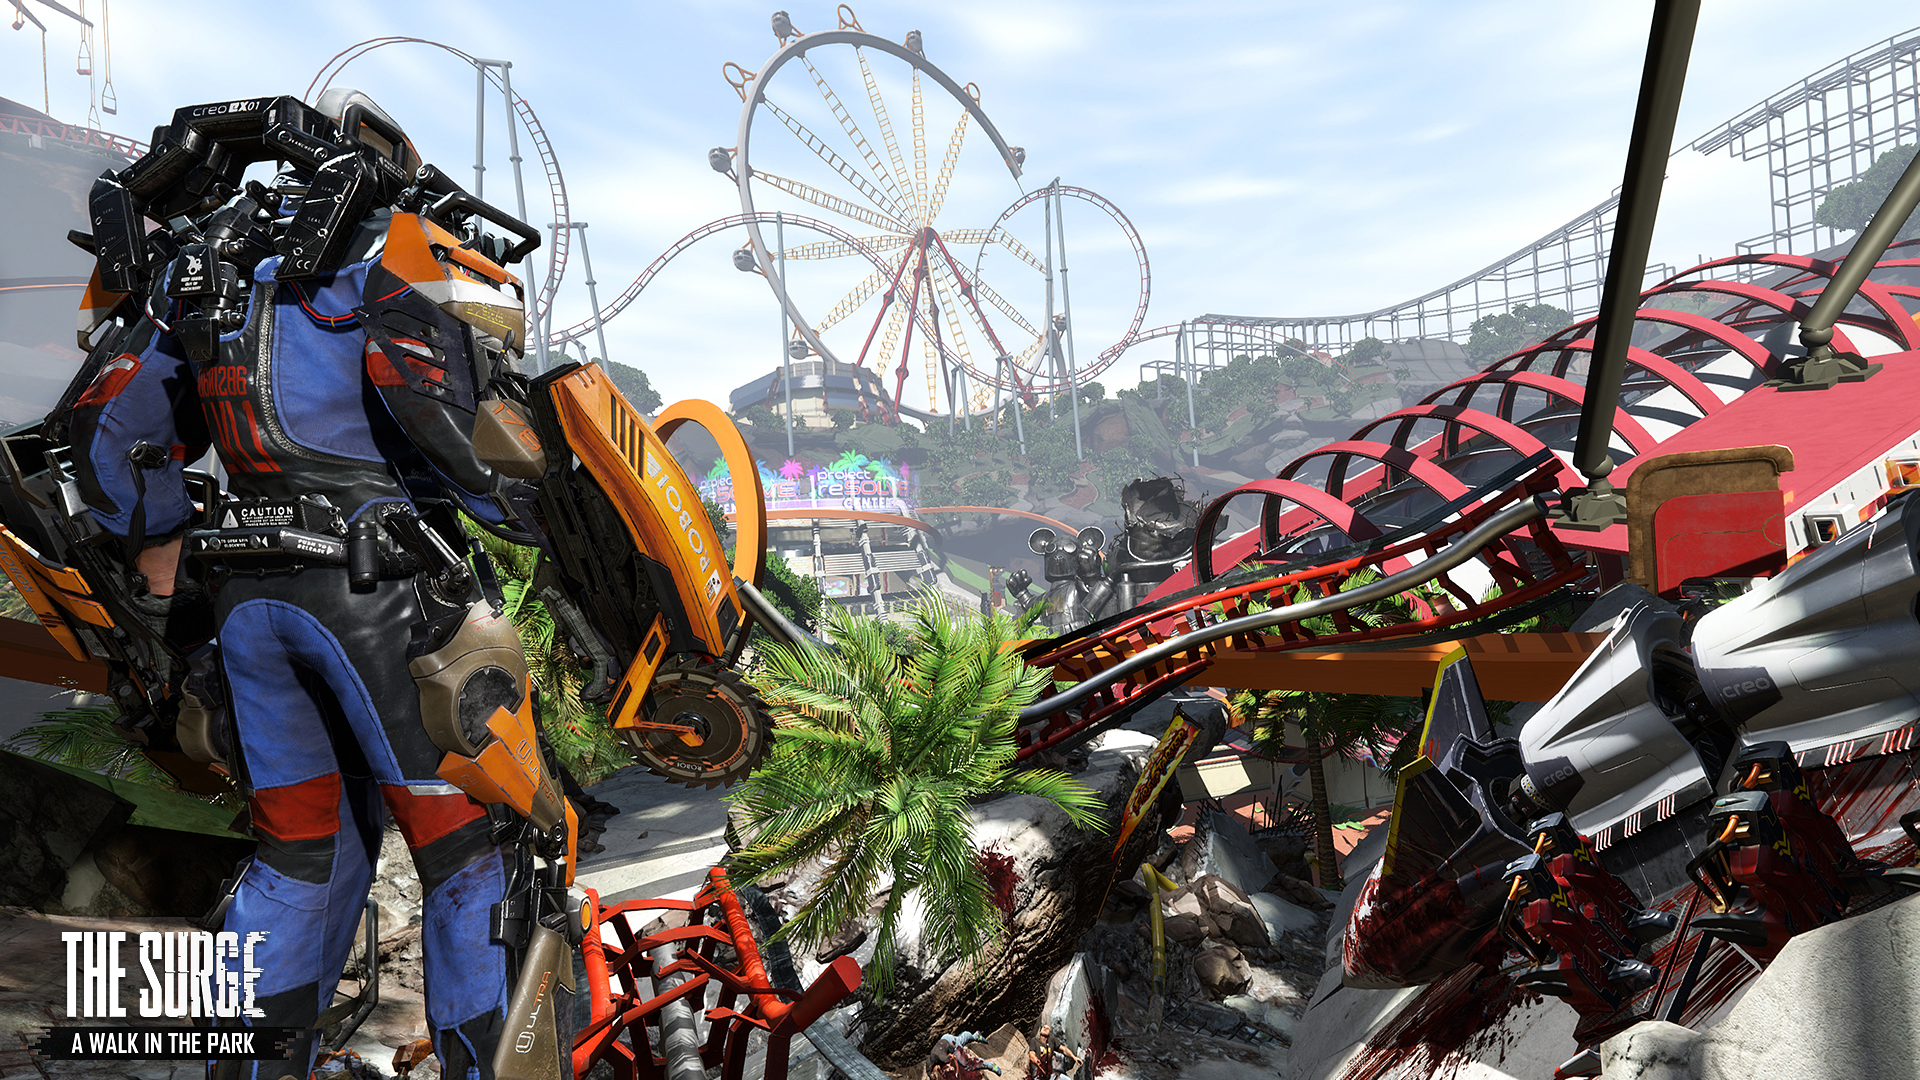 The Surge ‘A Walk in the Park’ expansion launches December 5